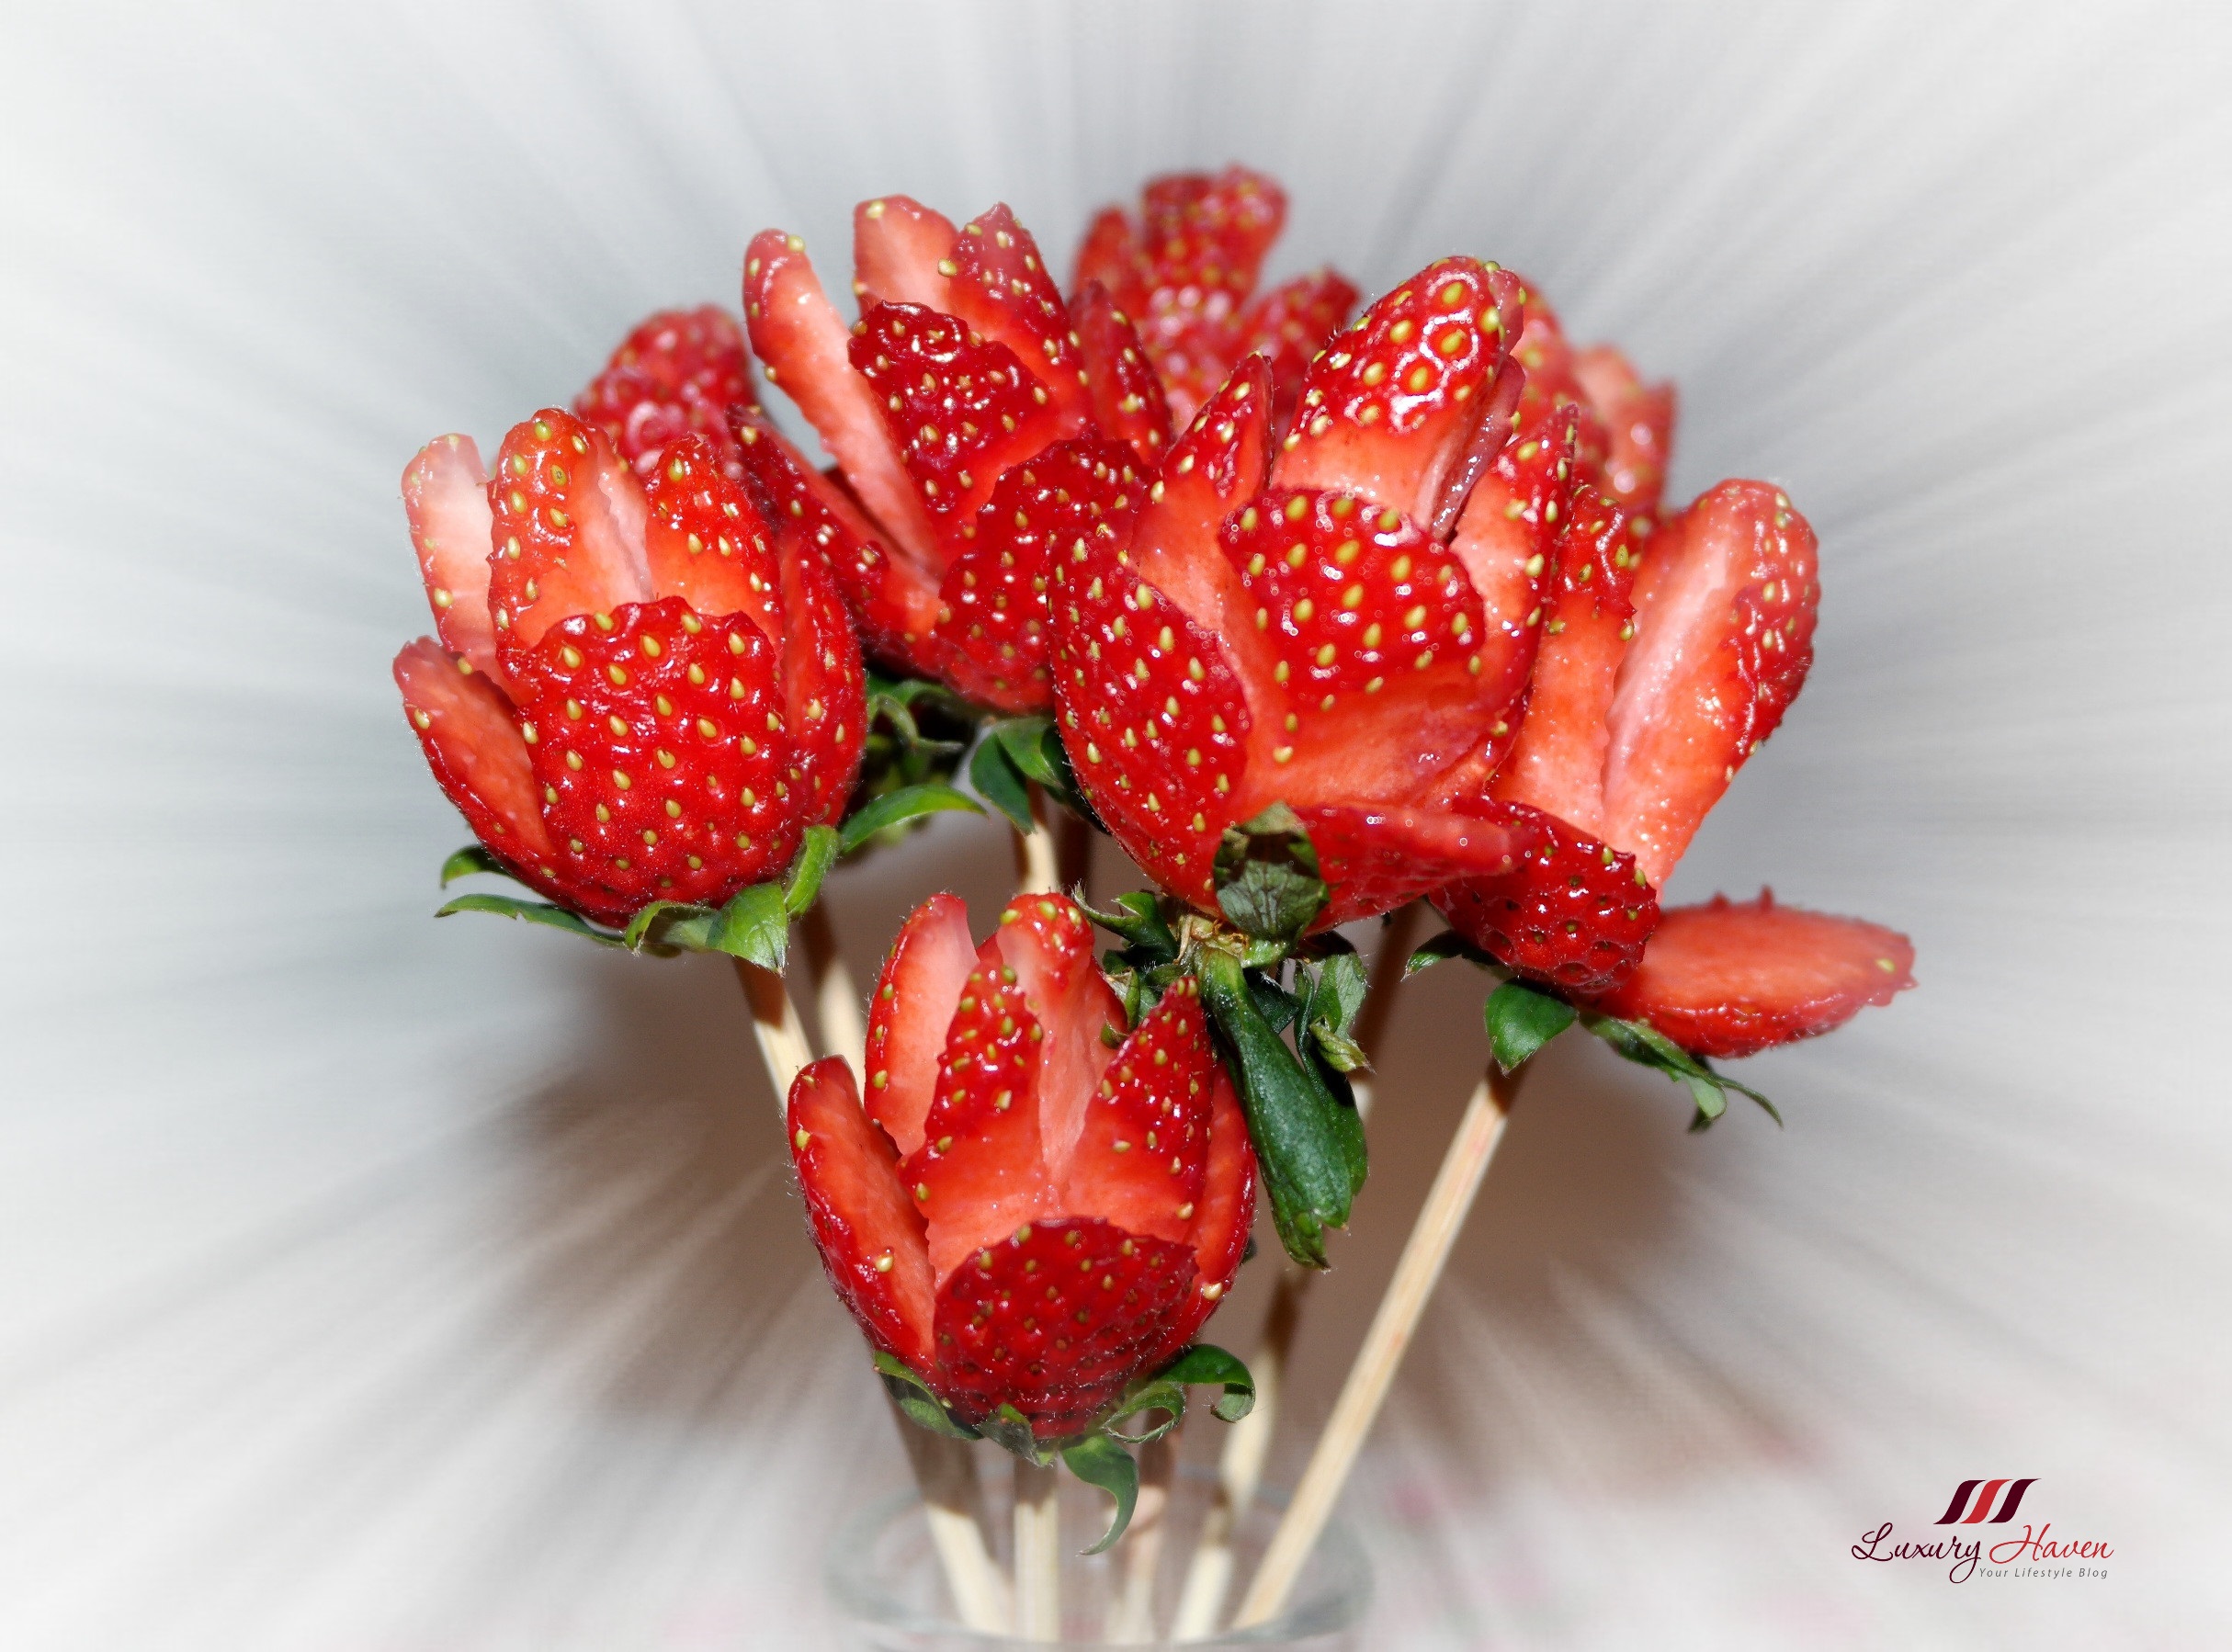 Foodista | Recipes, Cooking Tips, and Food News | Valentine's Day Strawberry Roses Bouquet